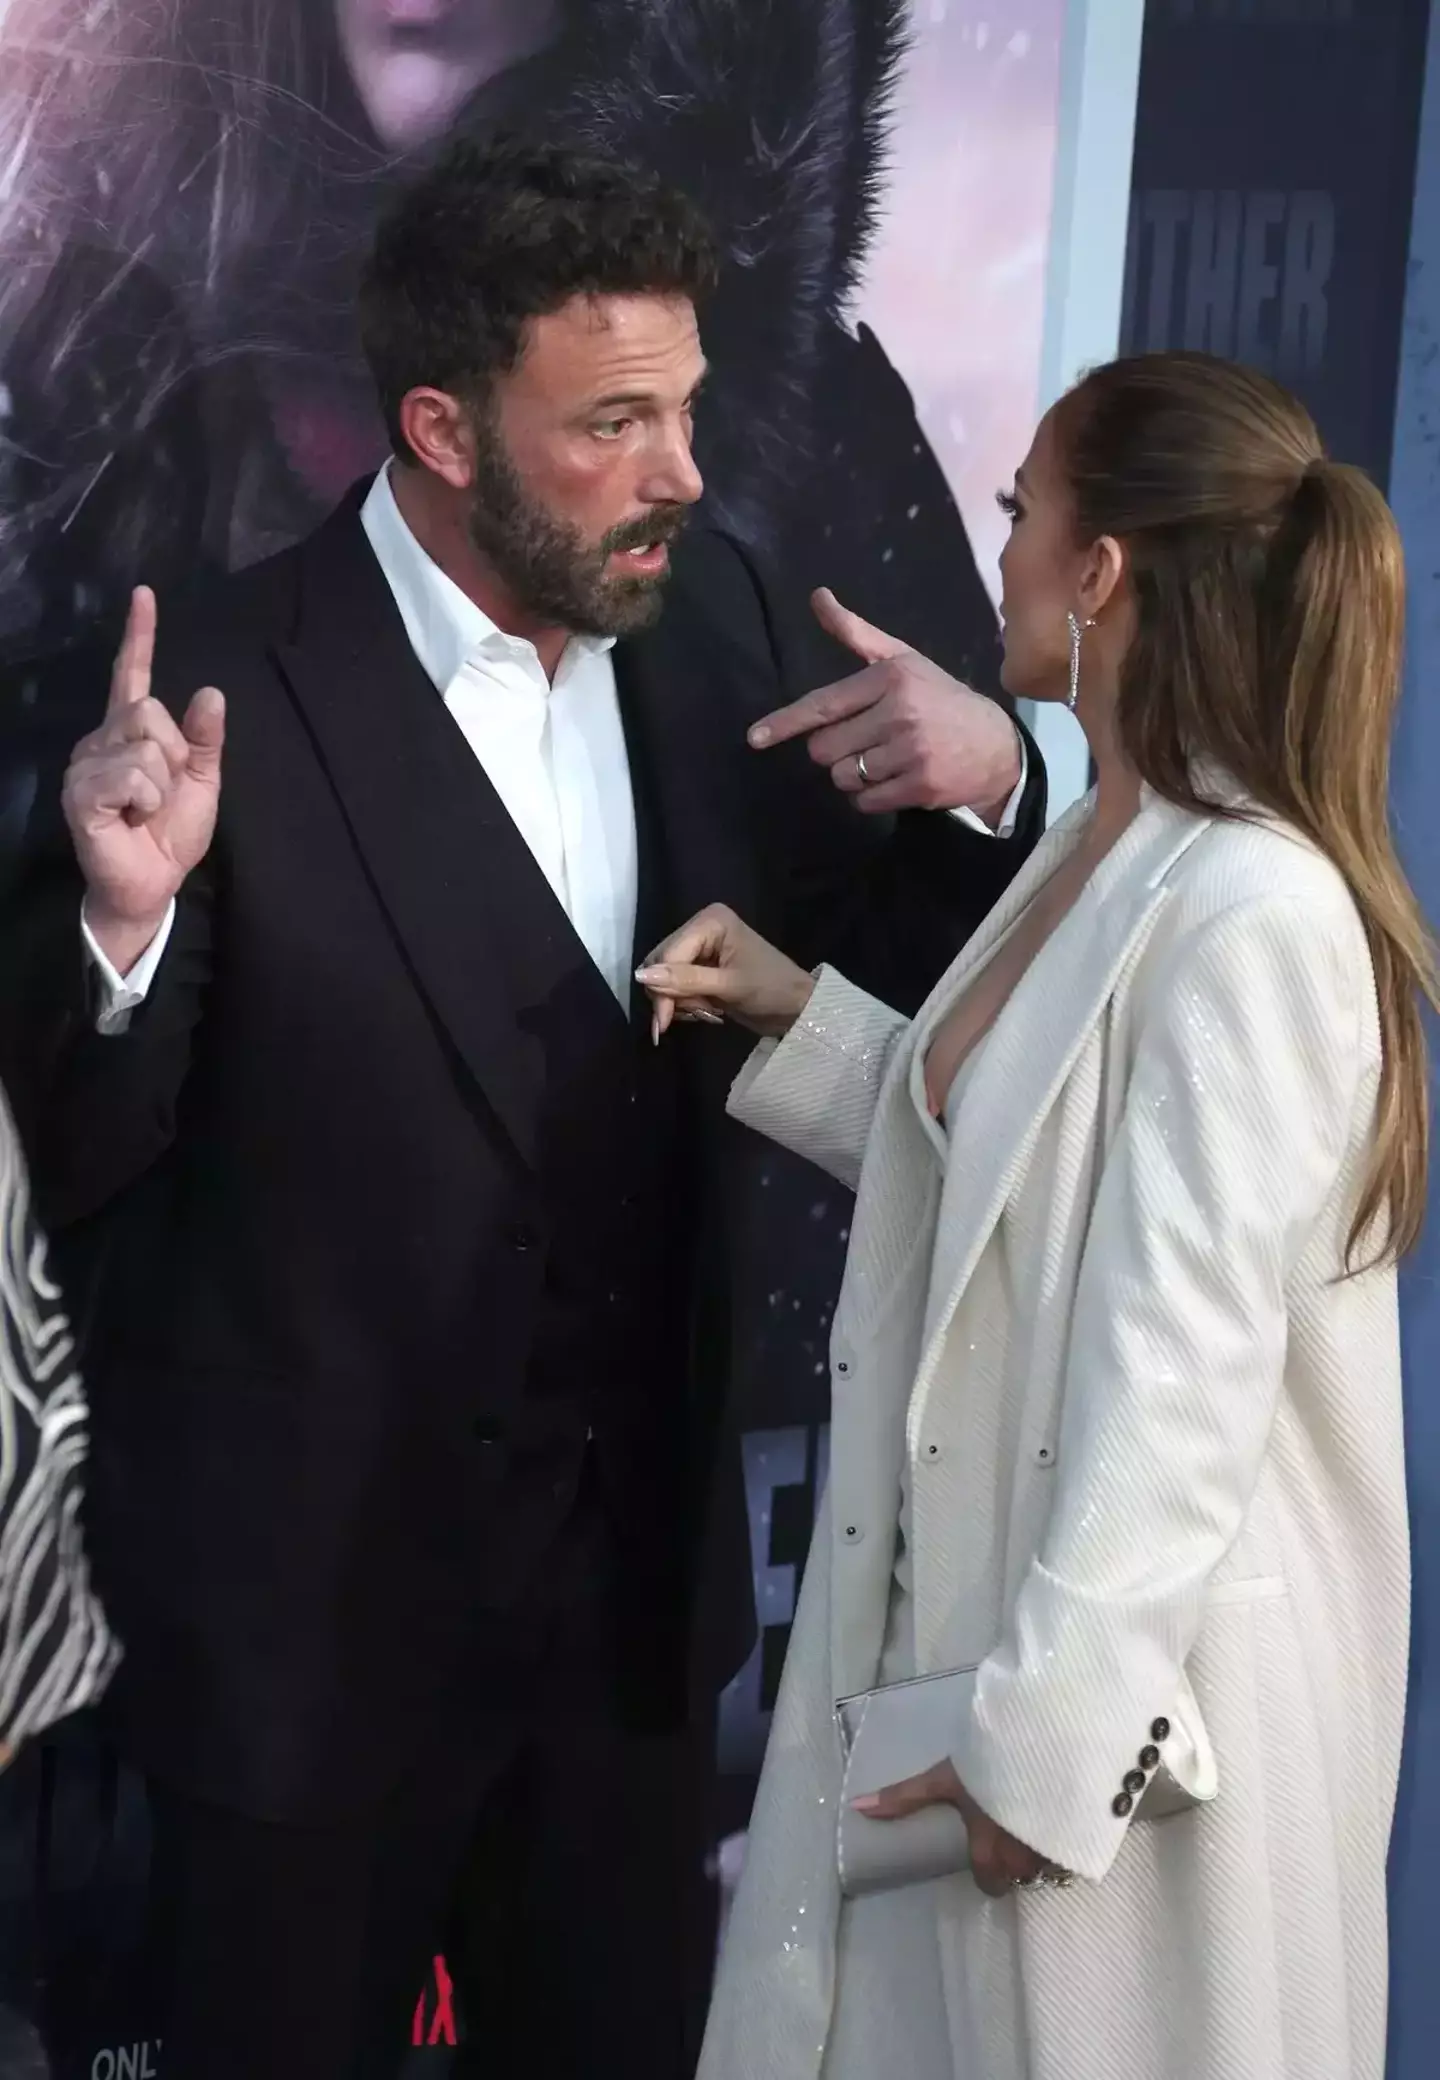 Ben Affleck and Jennifer Lopez were not having an argument, according to a source.